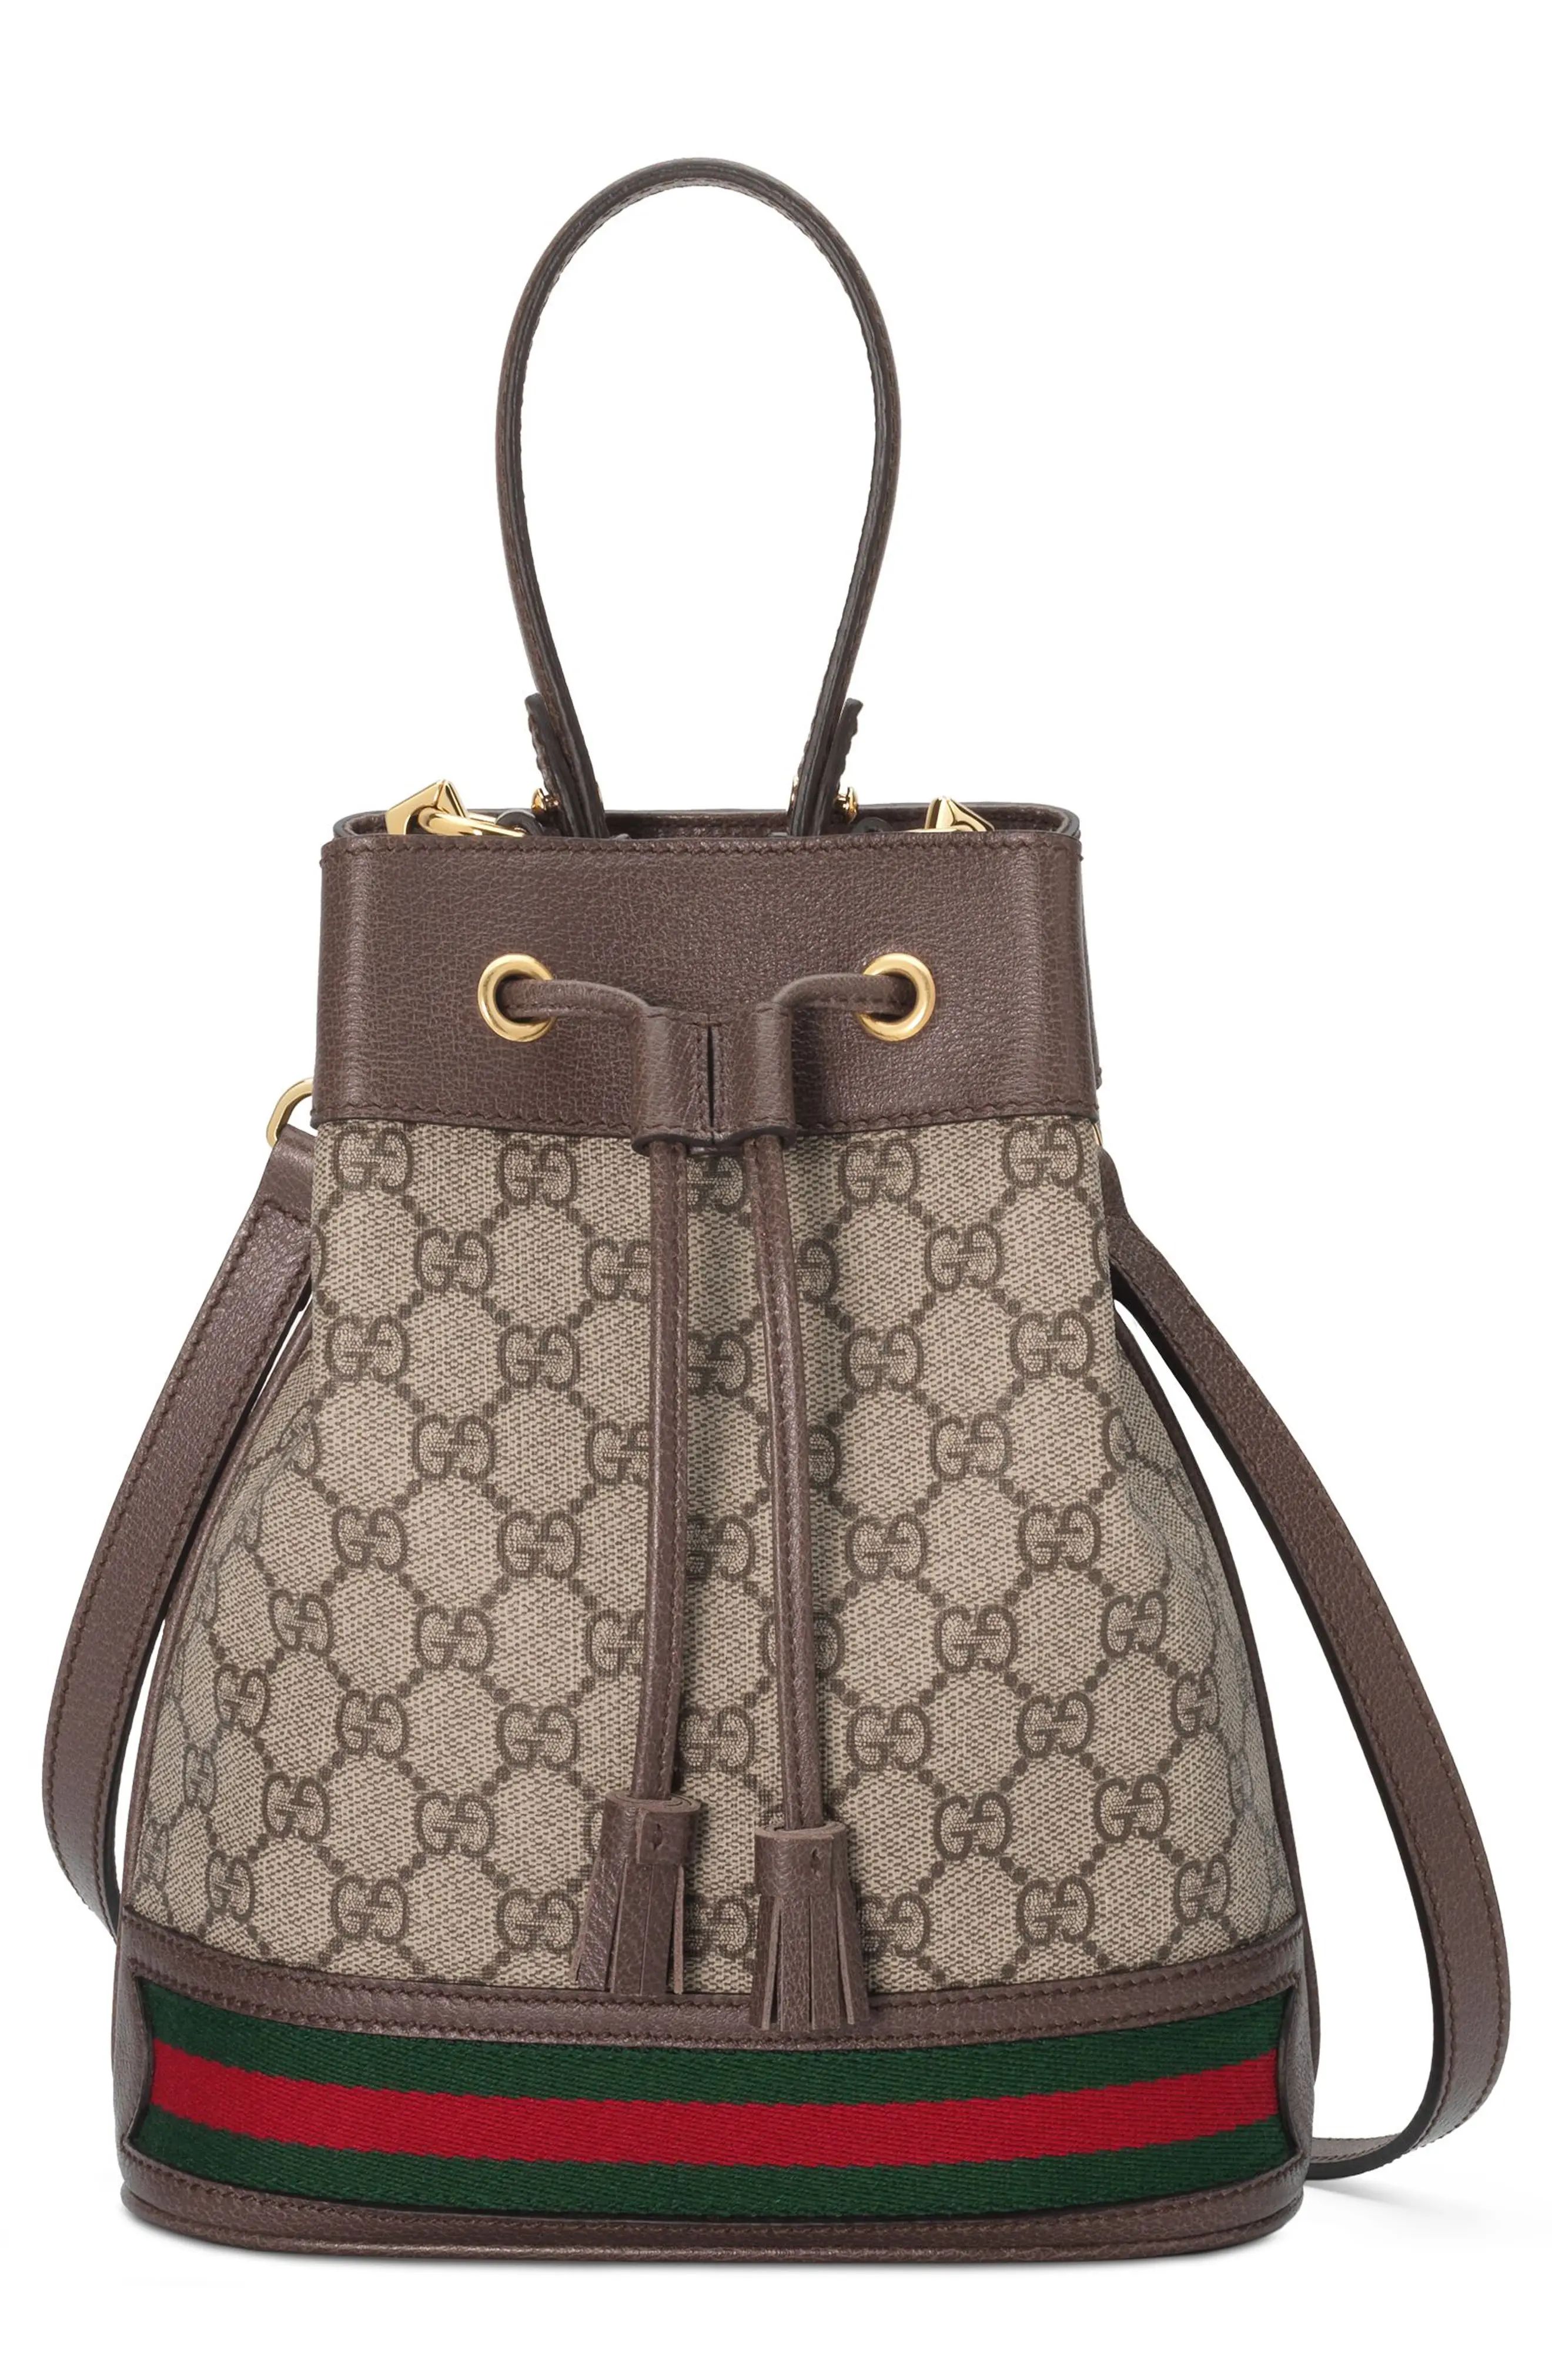 Gucci Small Ophidia GG Supreme Canvas Bucket Bag | Nordstrom